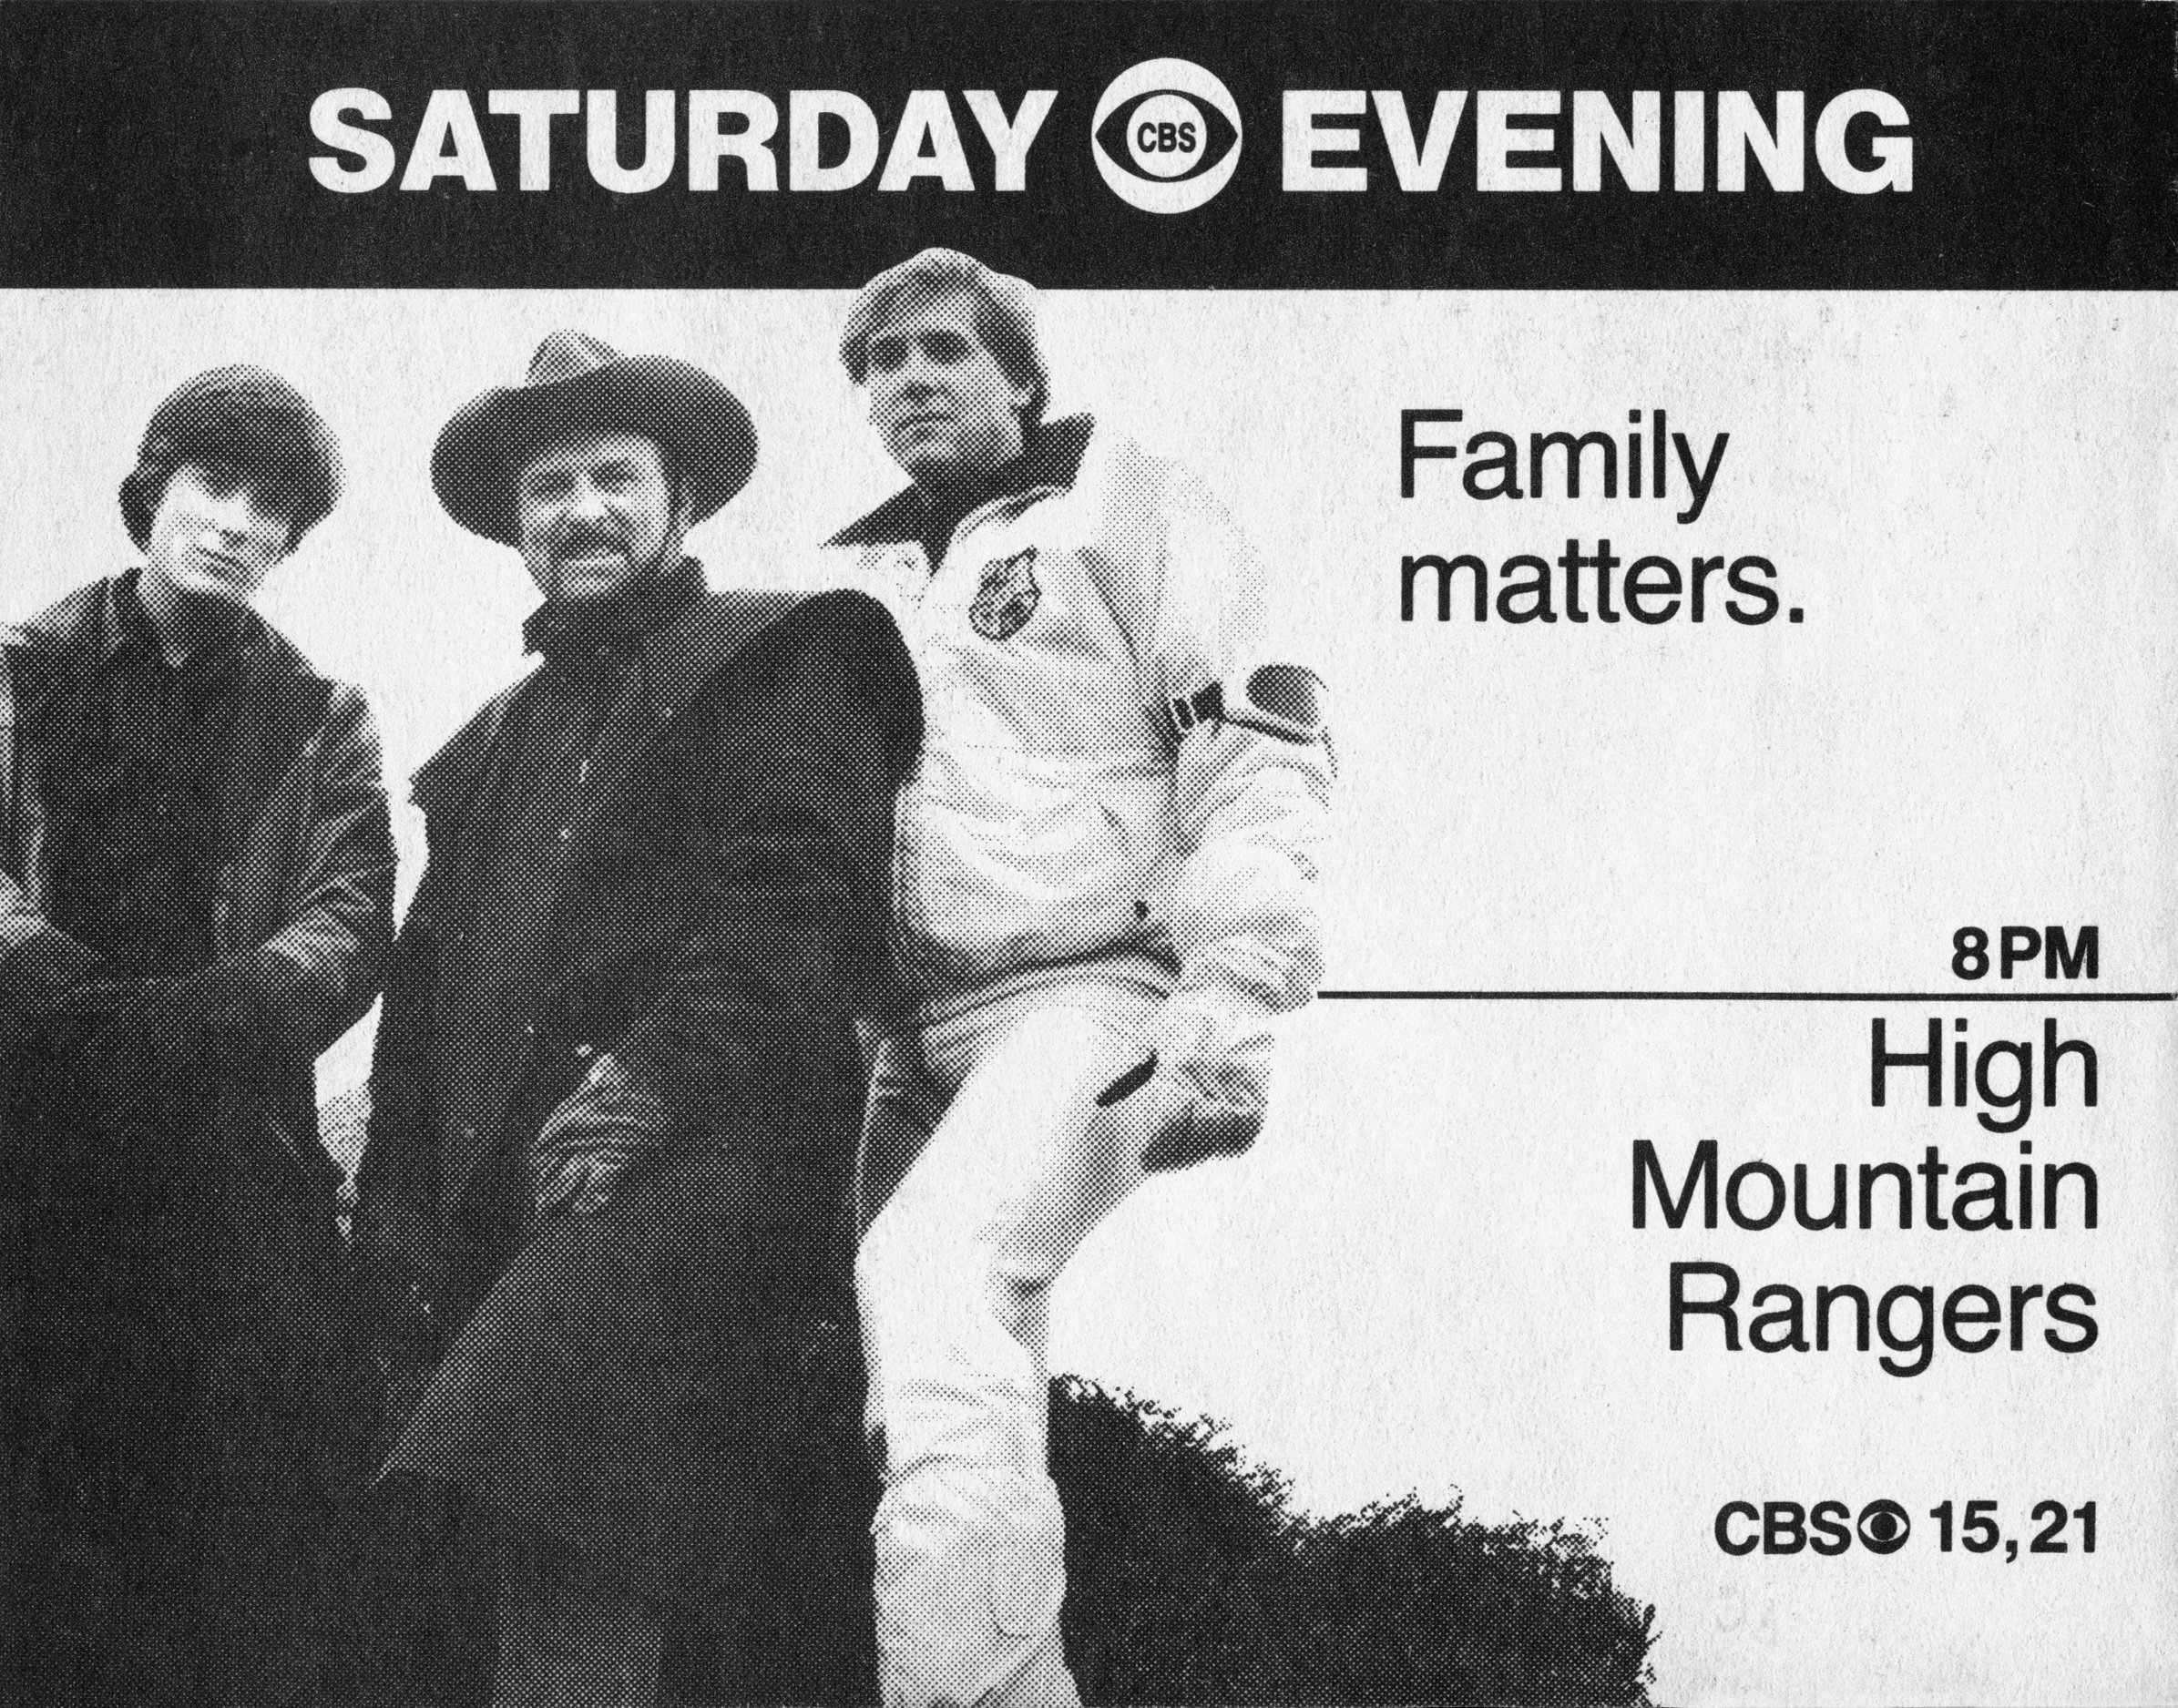 An ad for the Saturday primetime action adventure: High Mountain Rangers starring Shane Conrad, Robert Conrad, and Christian Conrad. | Source: Getty Images